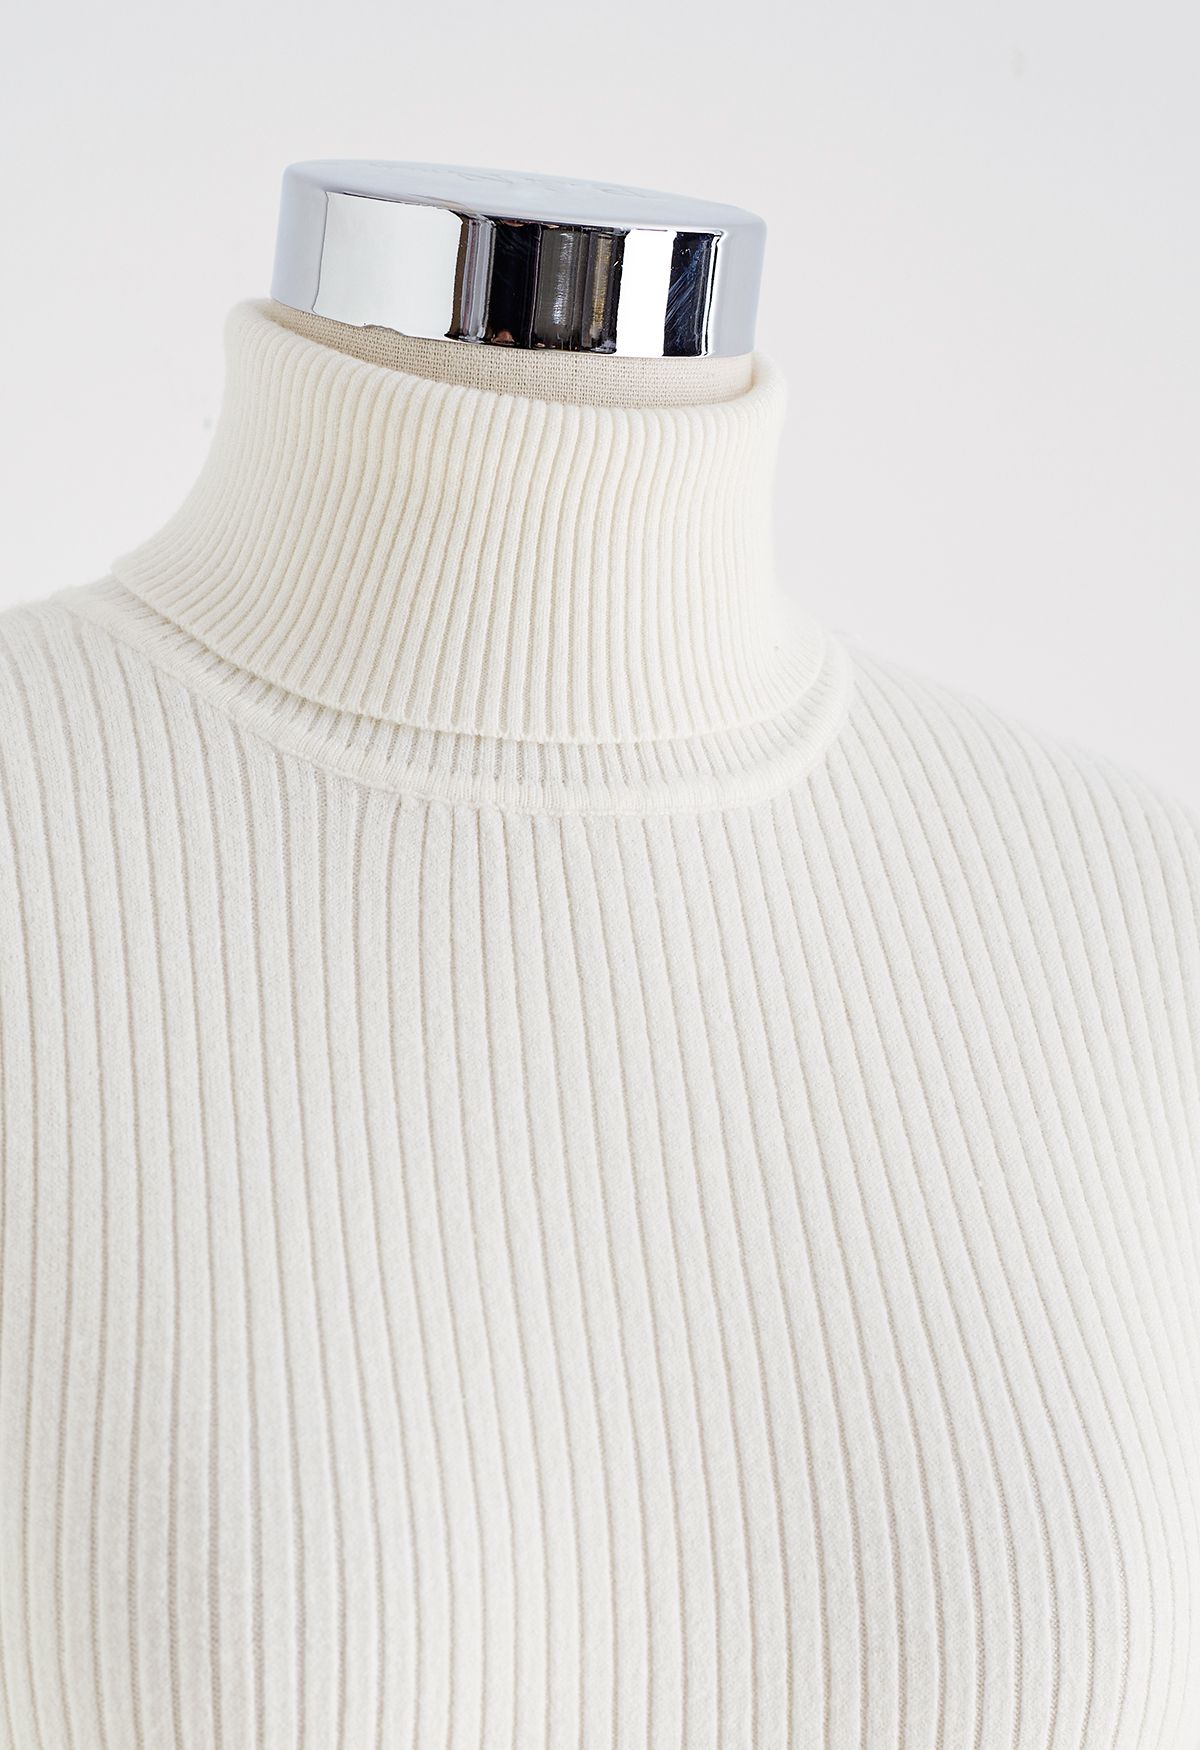 Turtleneck Soft Knit Sleeveless Top in White